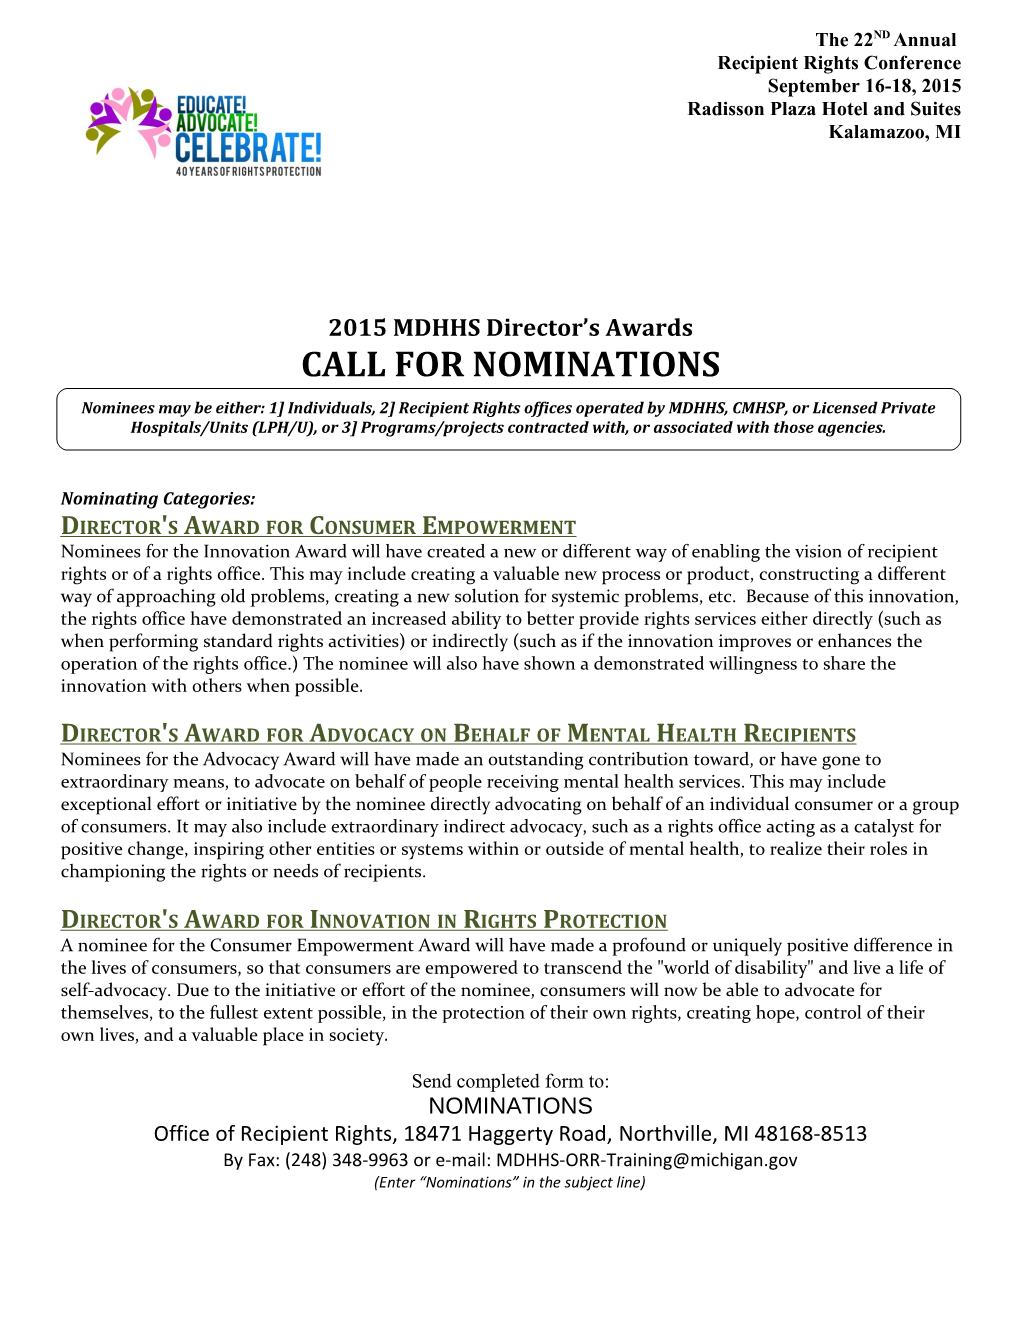 2013 Director's Awards Call for Nominations